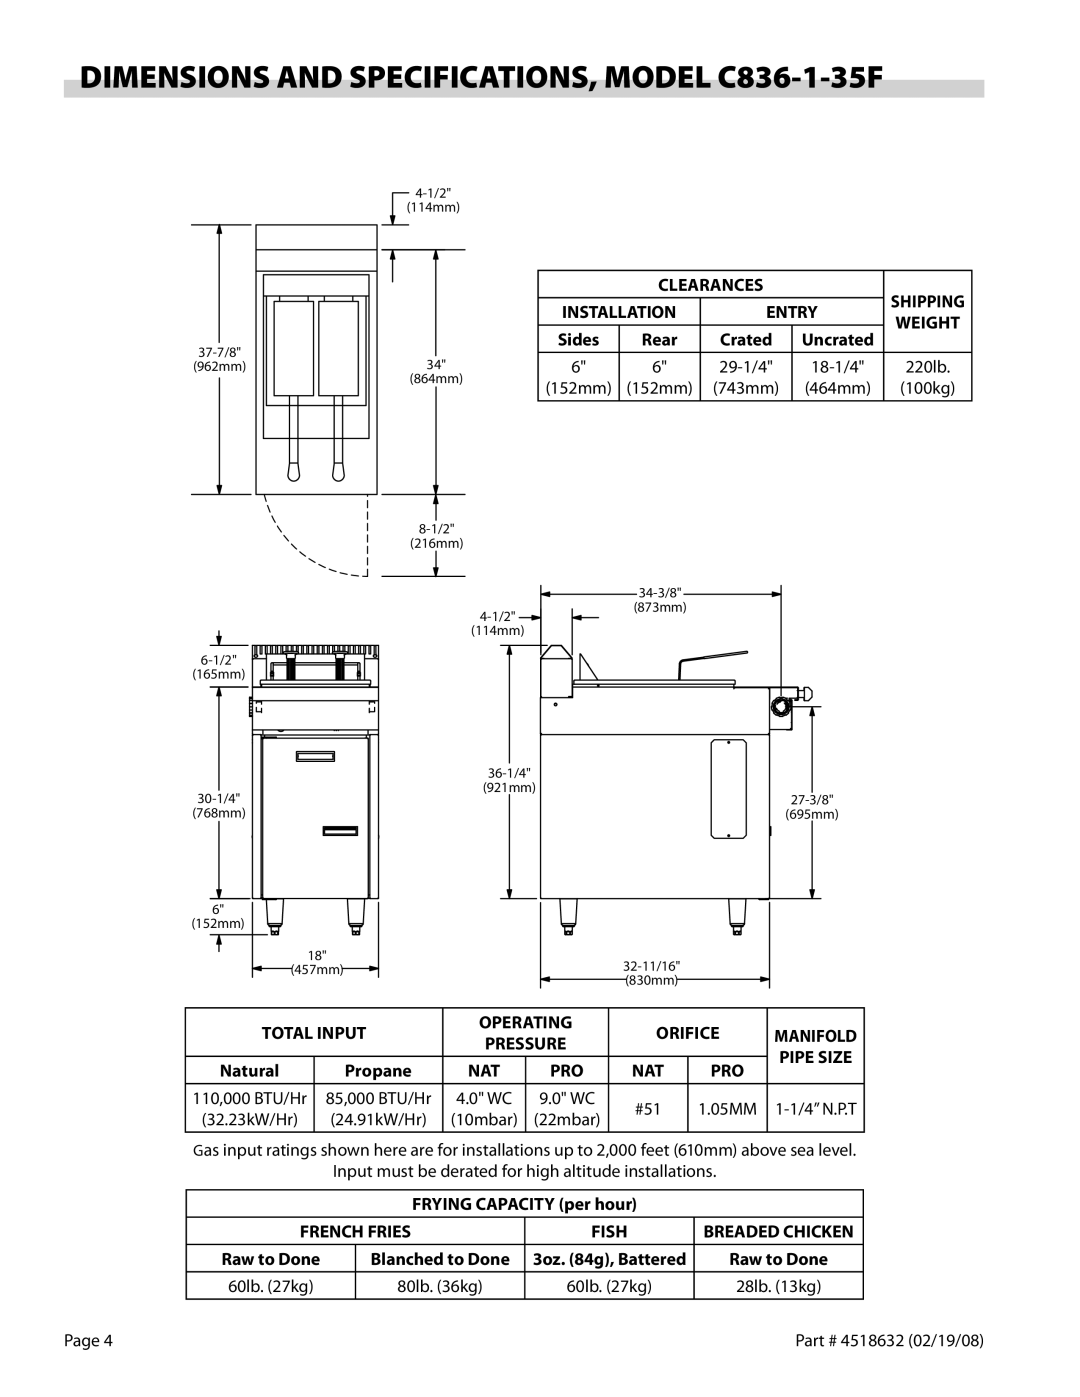 Garland operation manual DIMENSIONS AND SPECIFICATIONS, MODEL C836-1-35F 